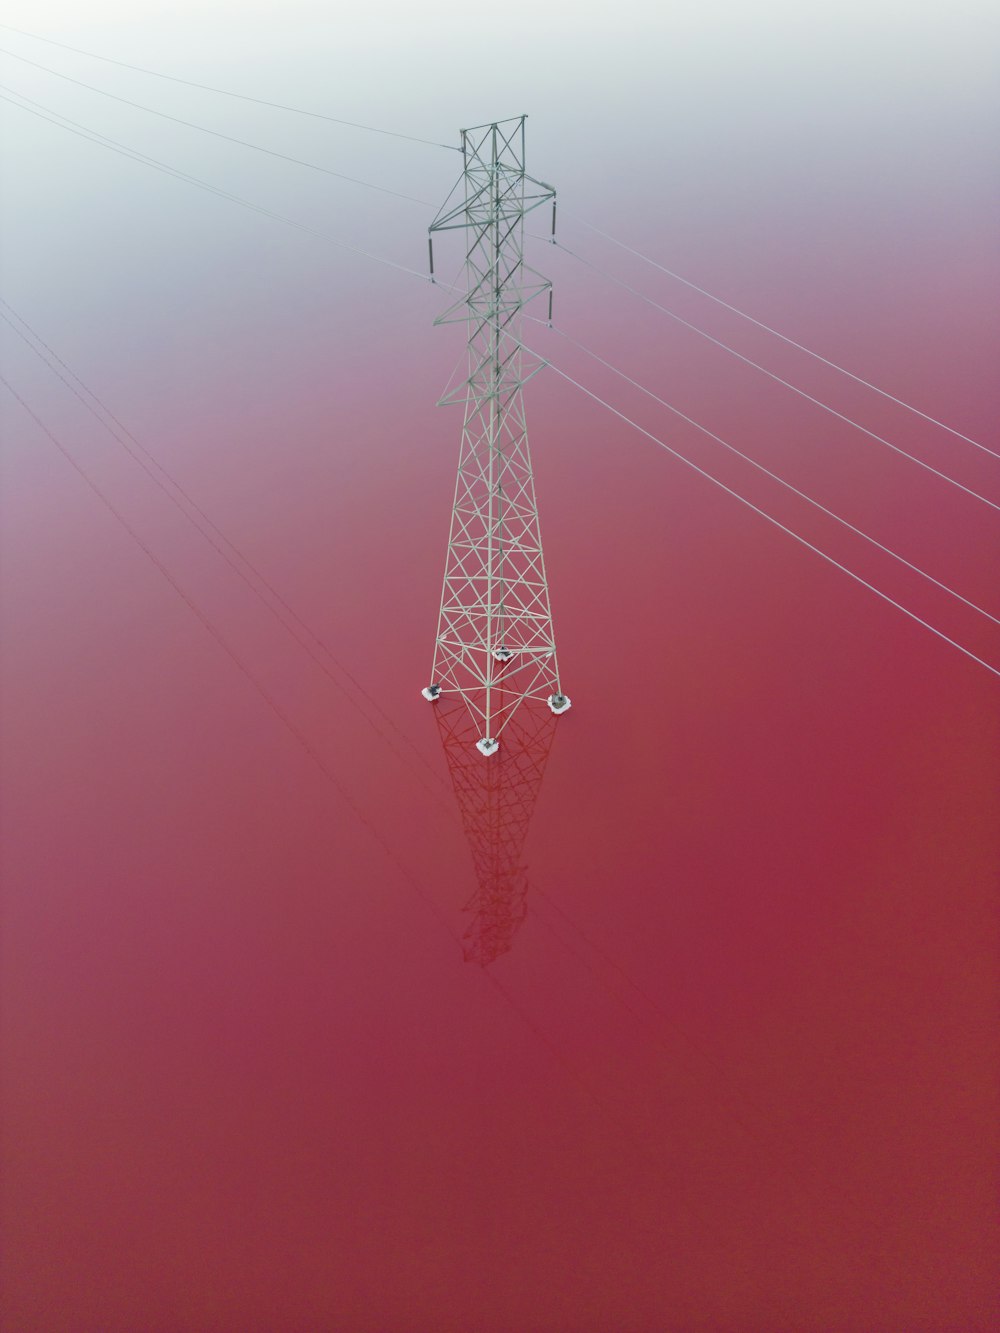 a tower with wires